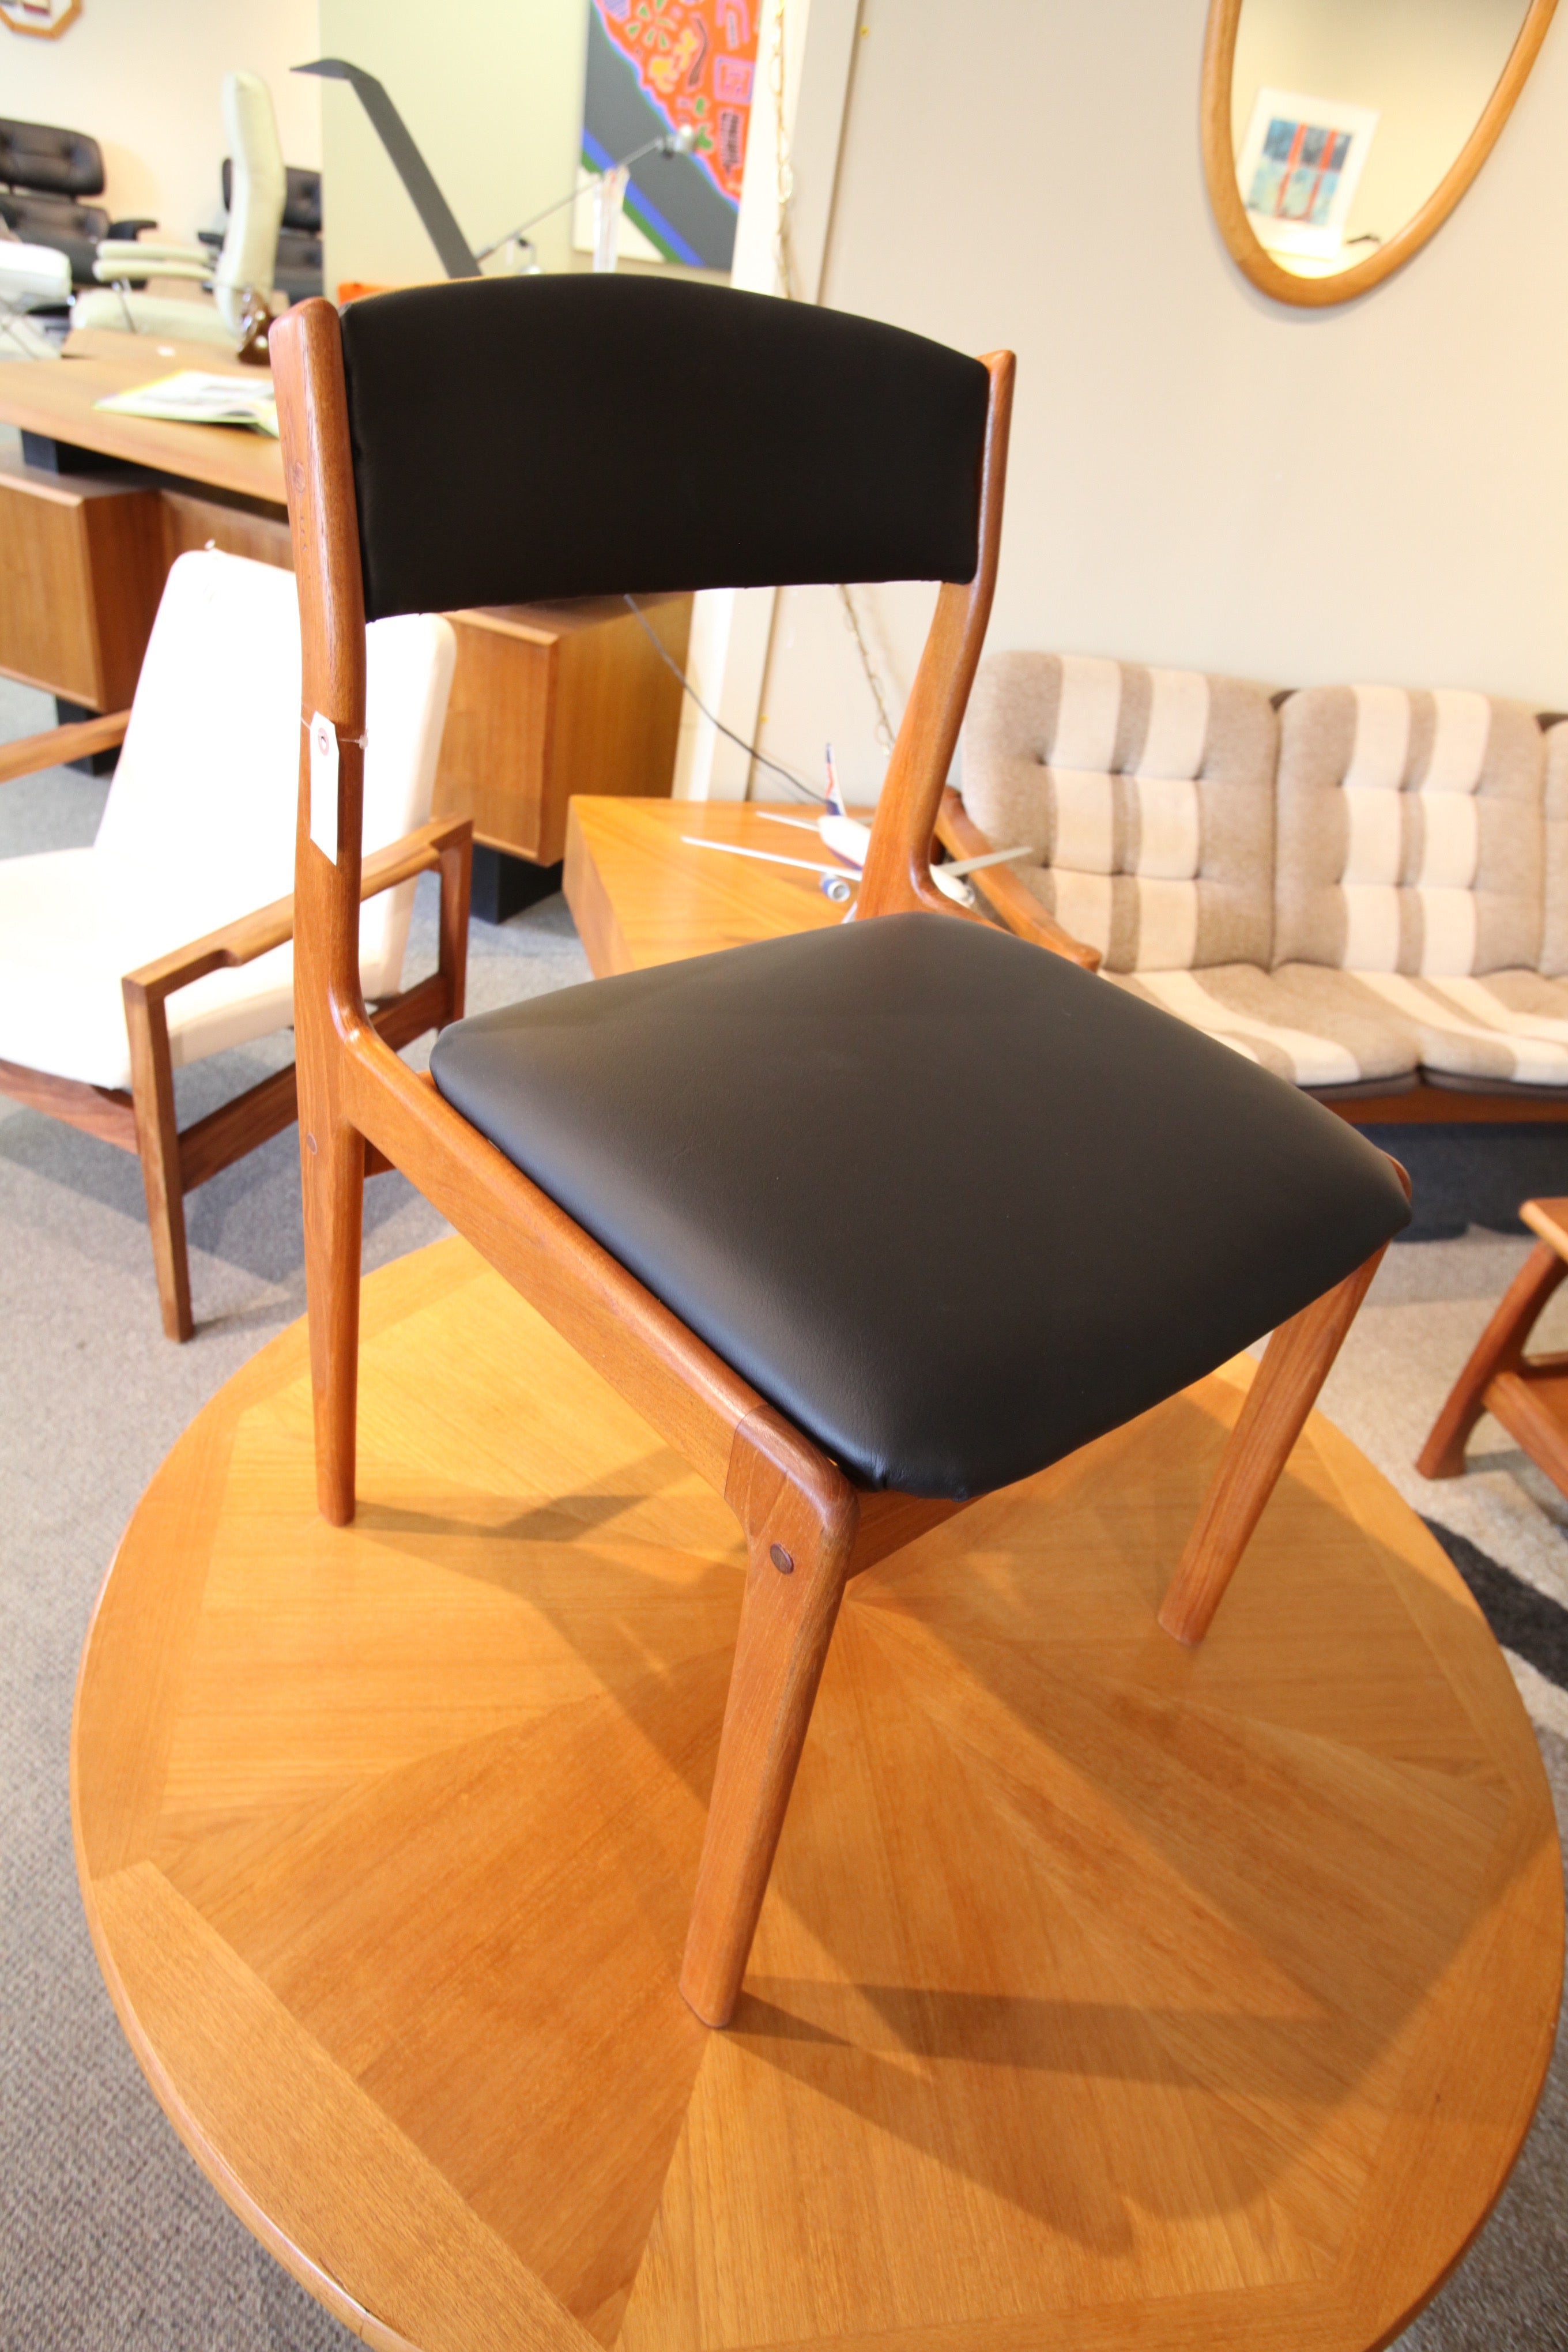 Vintage Teak Chair with new Leather Upholstery